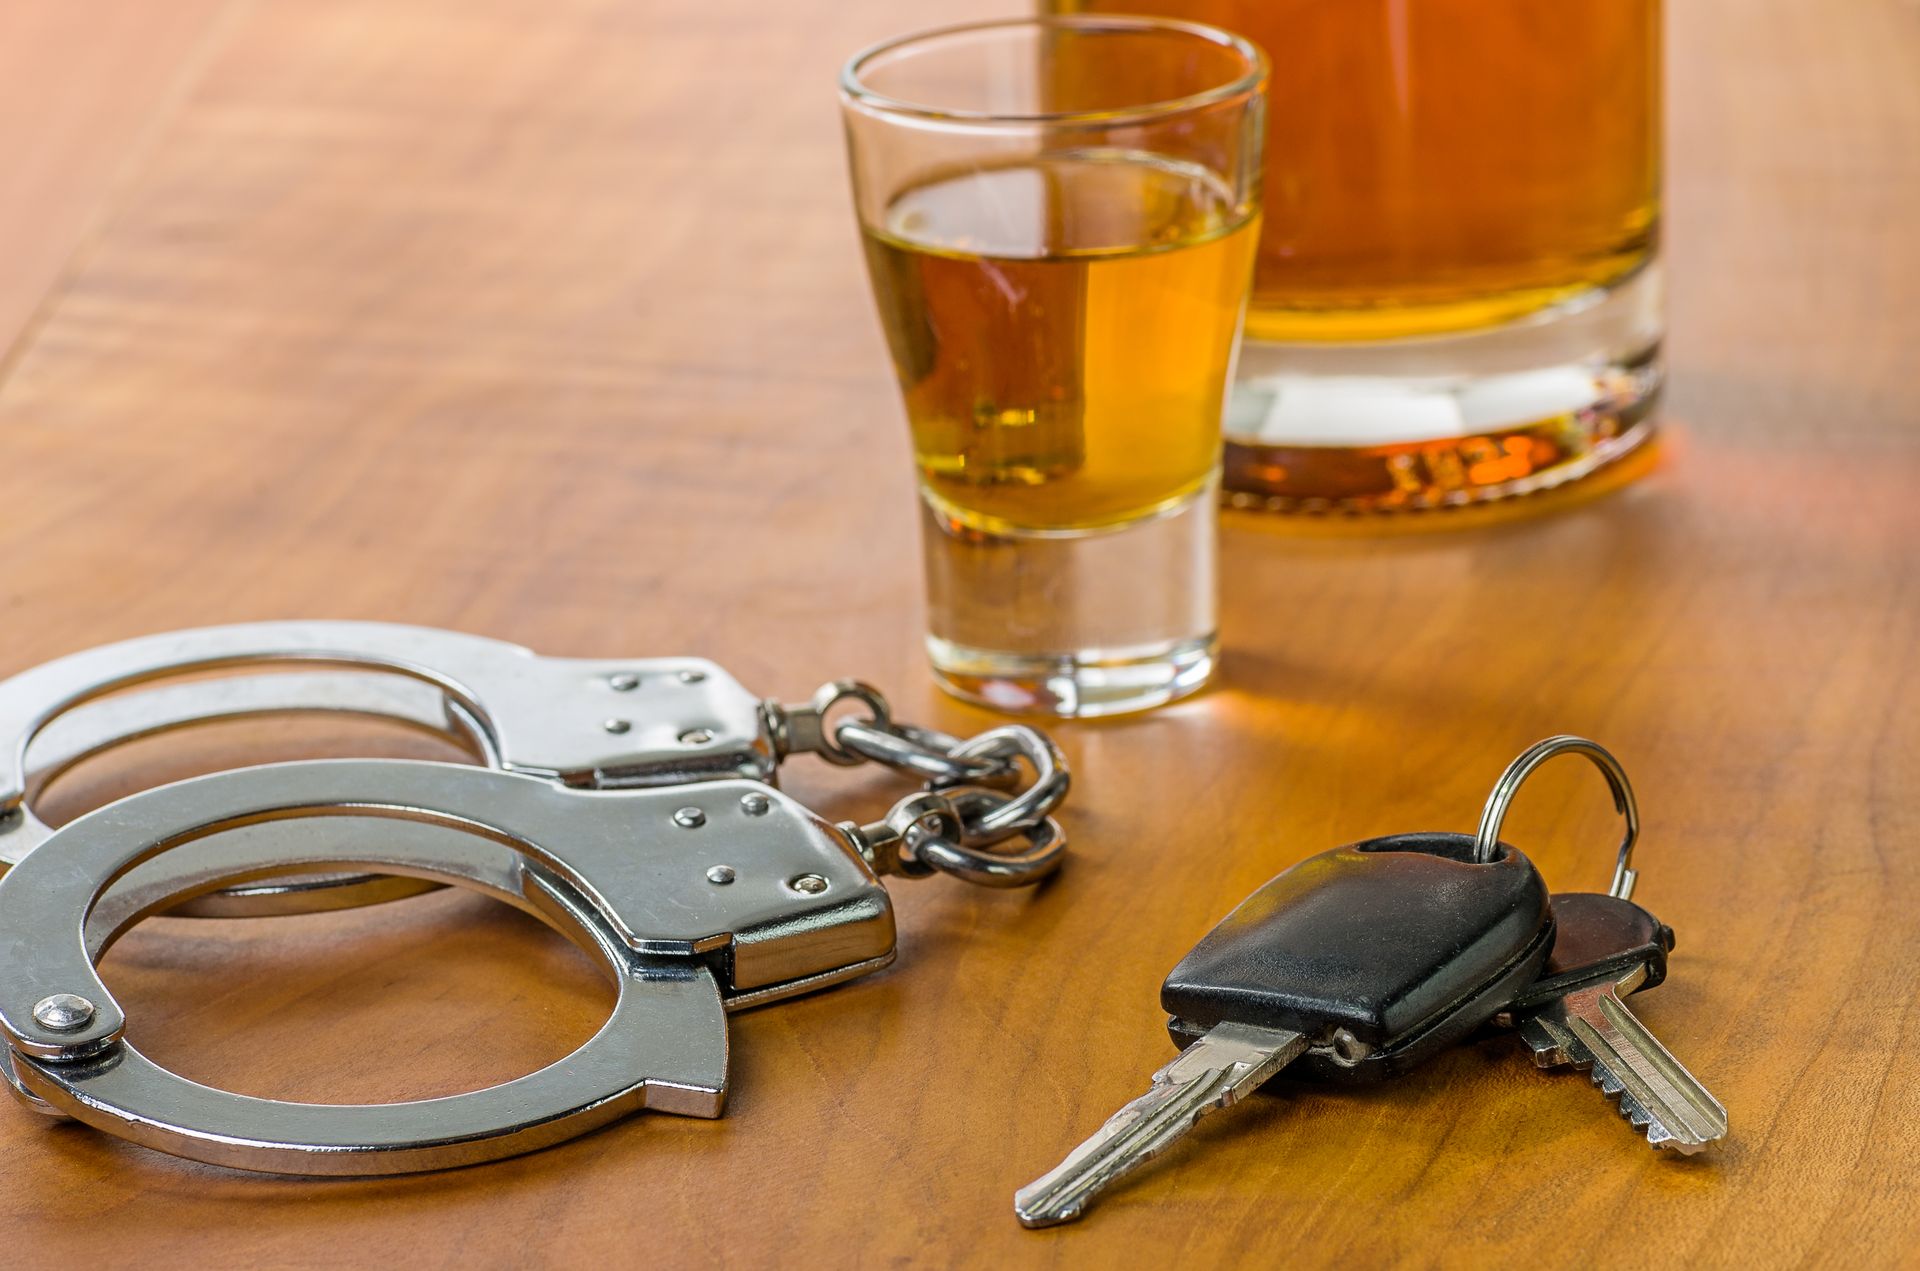 An image of handcuffs and car keys next to a small glass of whiskey and a large glass of whiskey